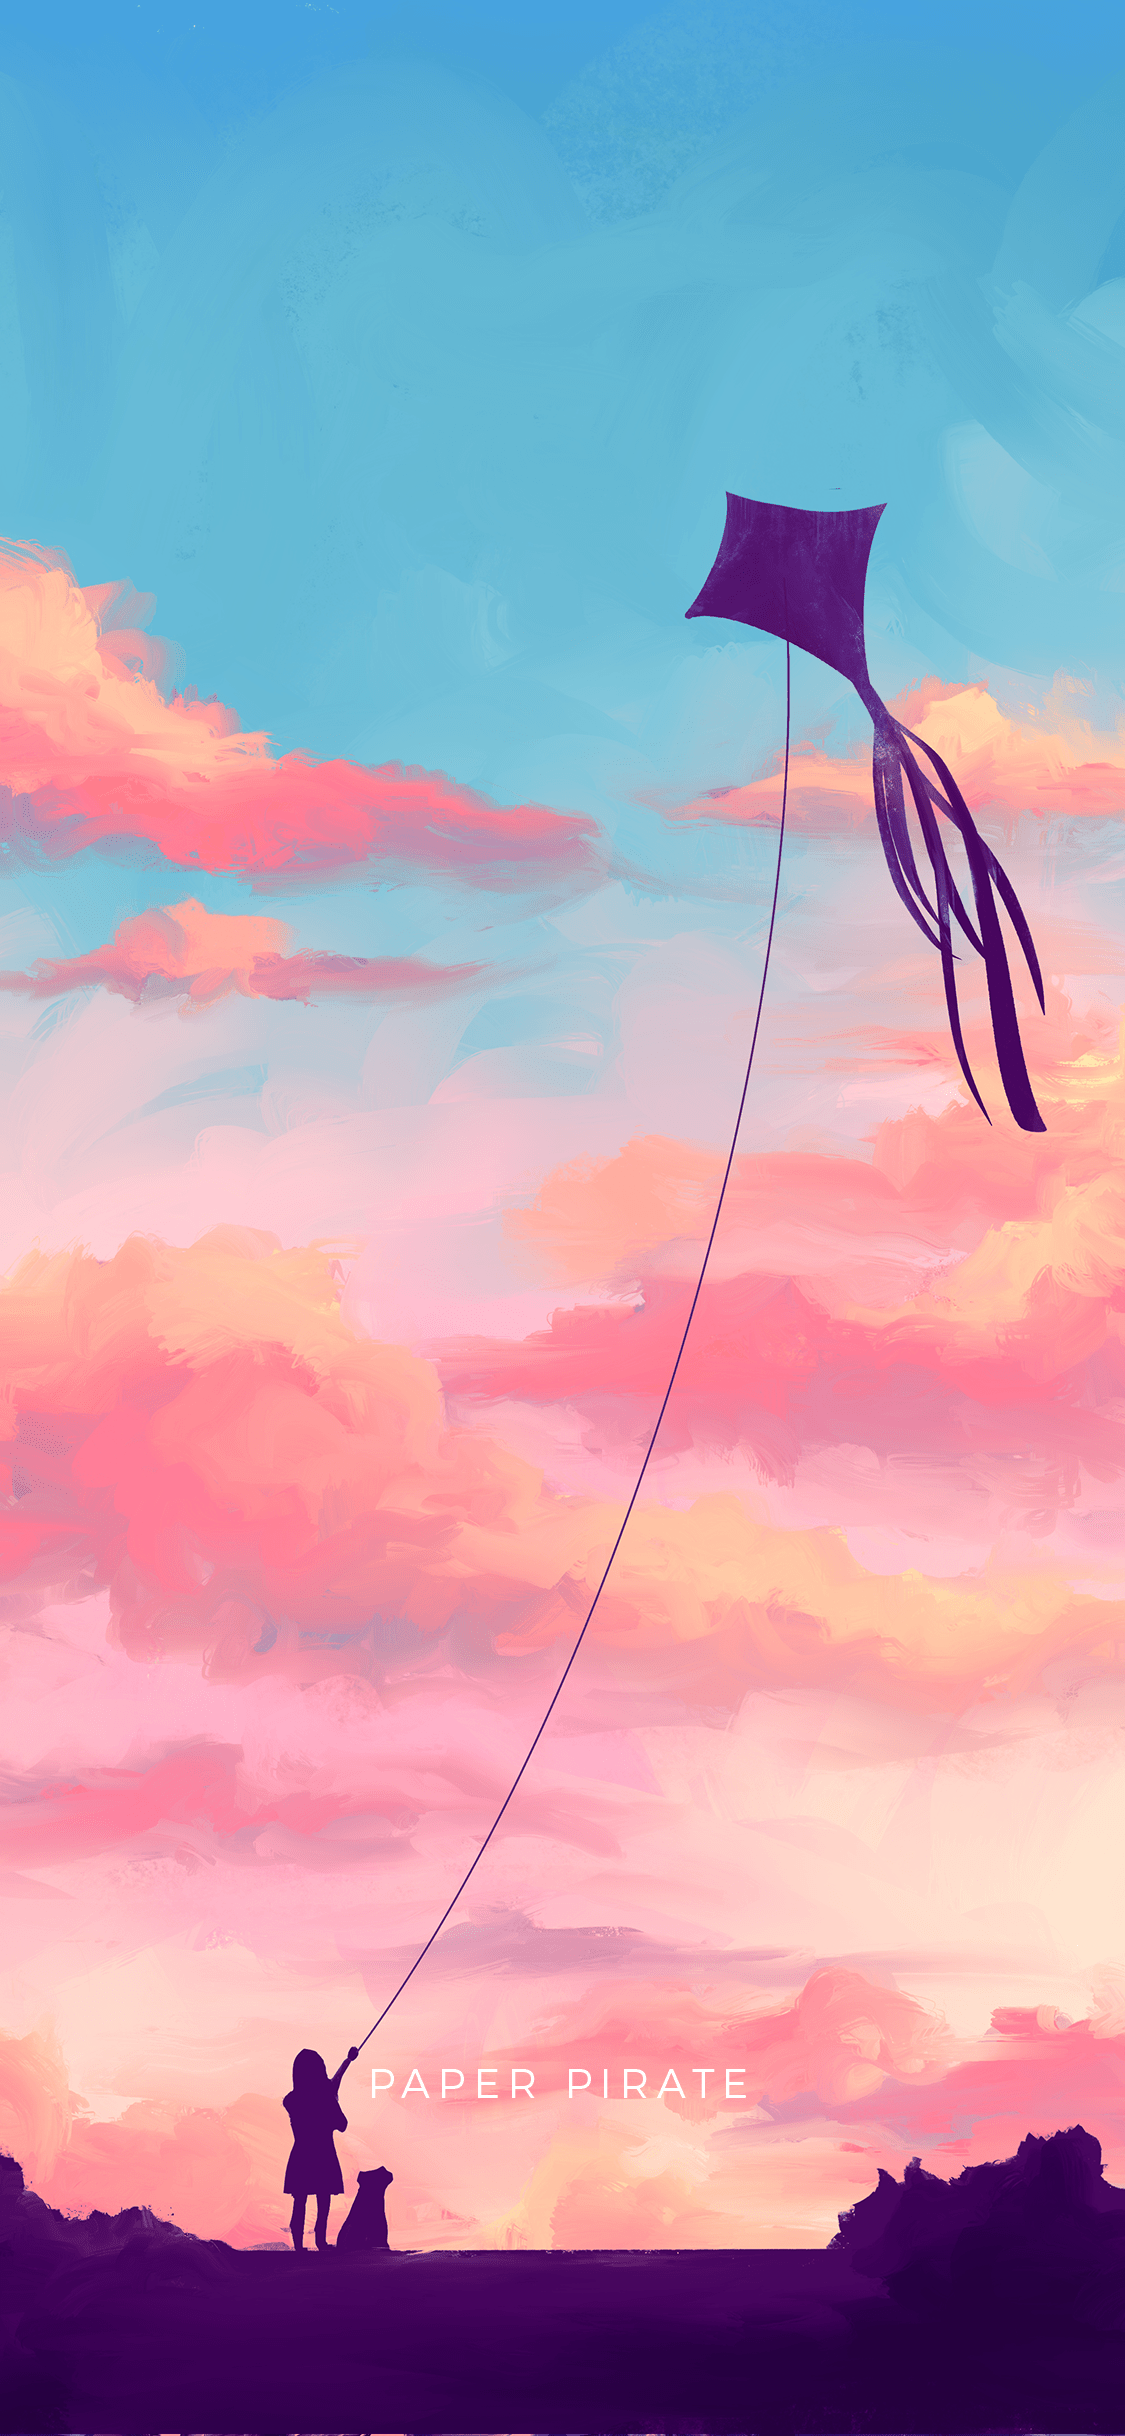 A digital painting of a girl flying a kite in a sunset sky. - Pirate